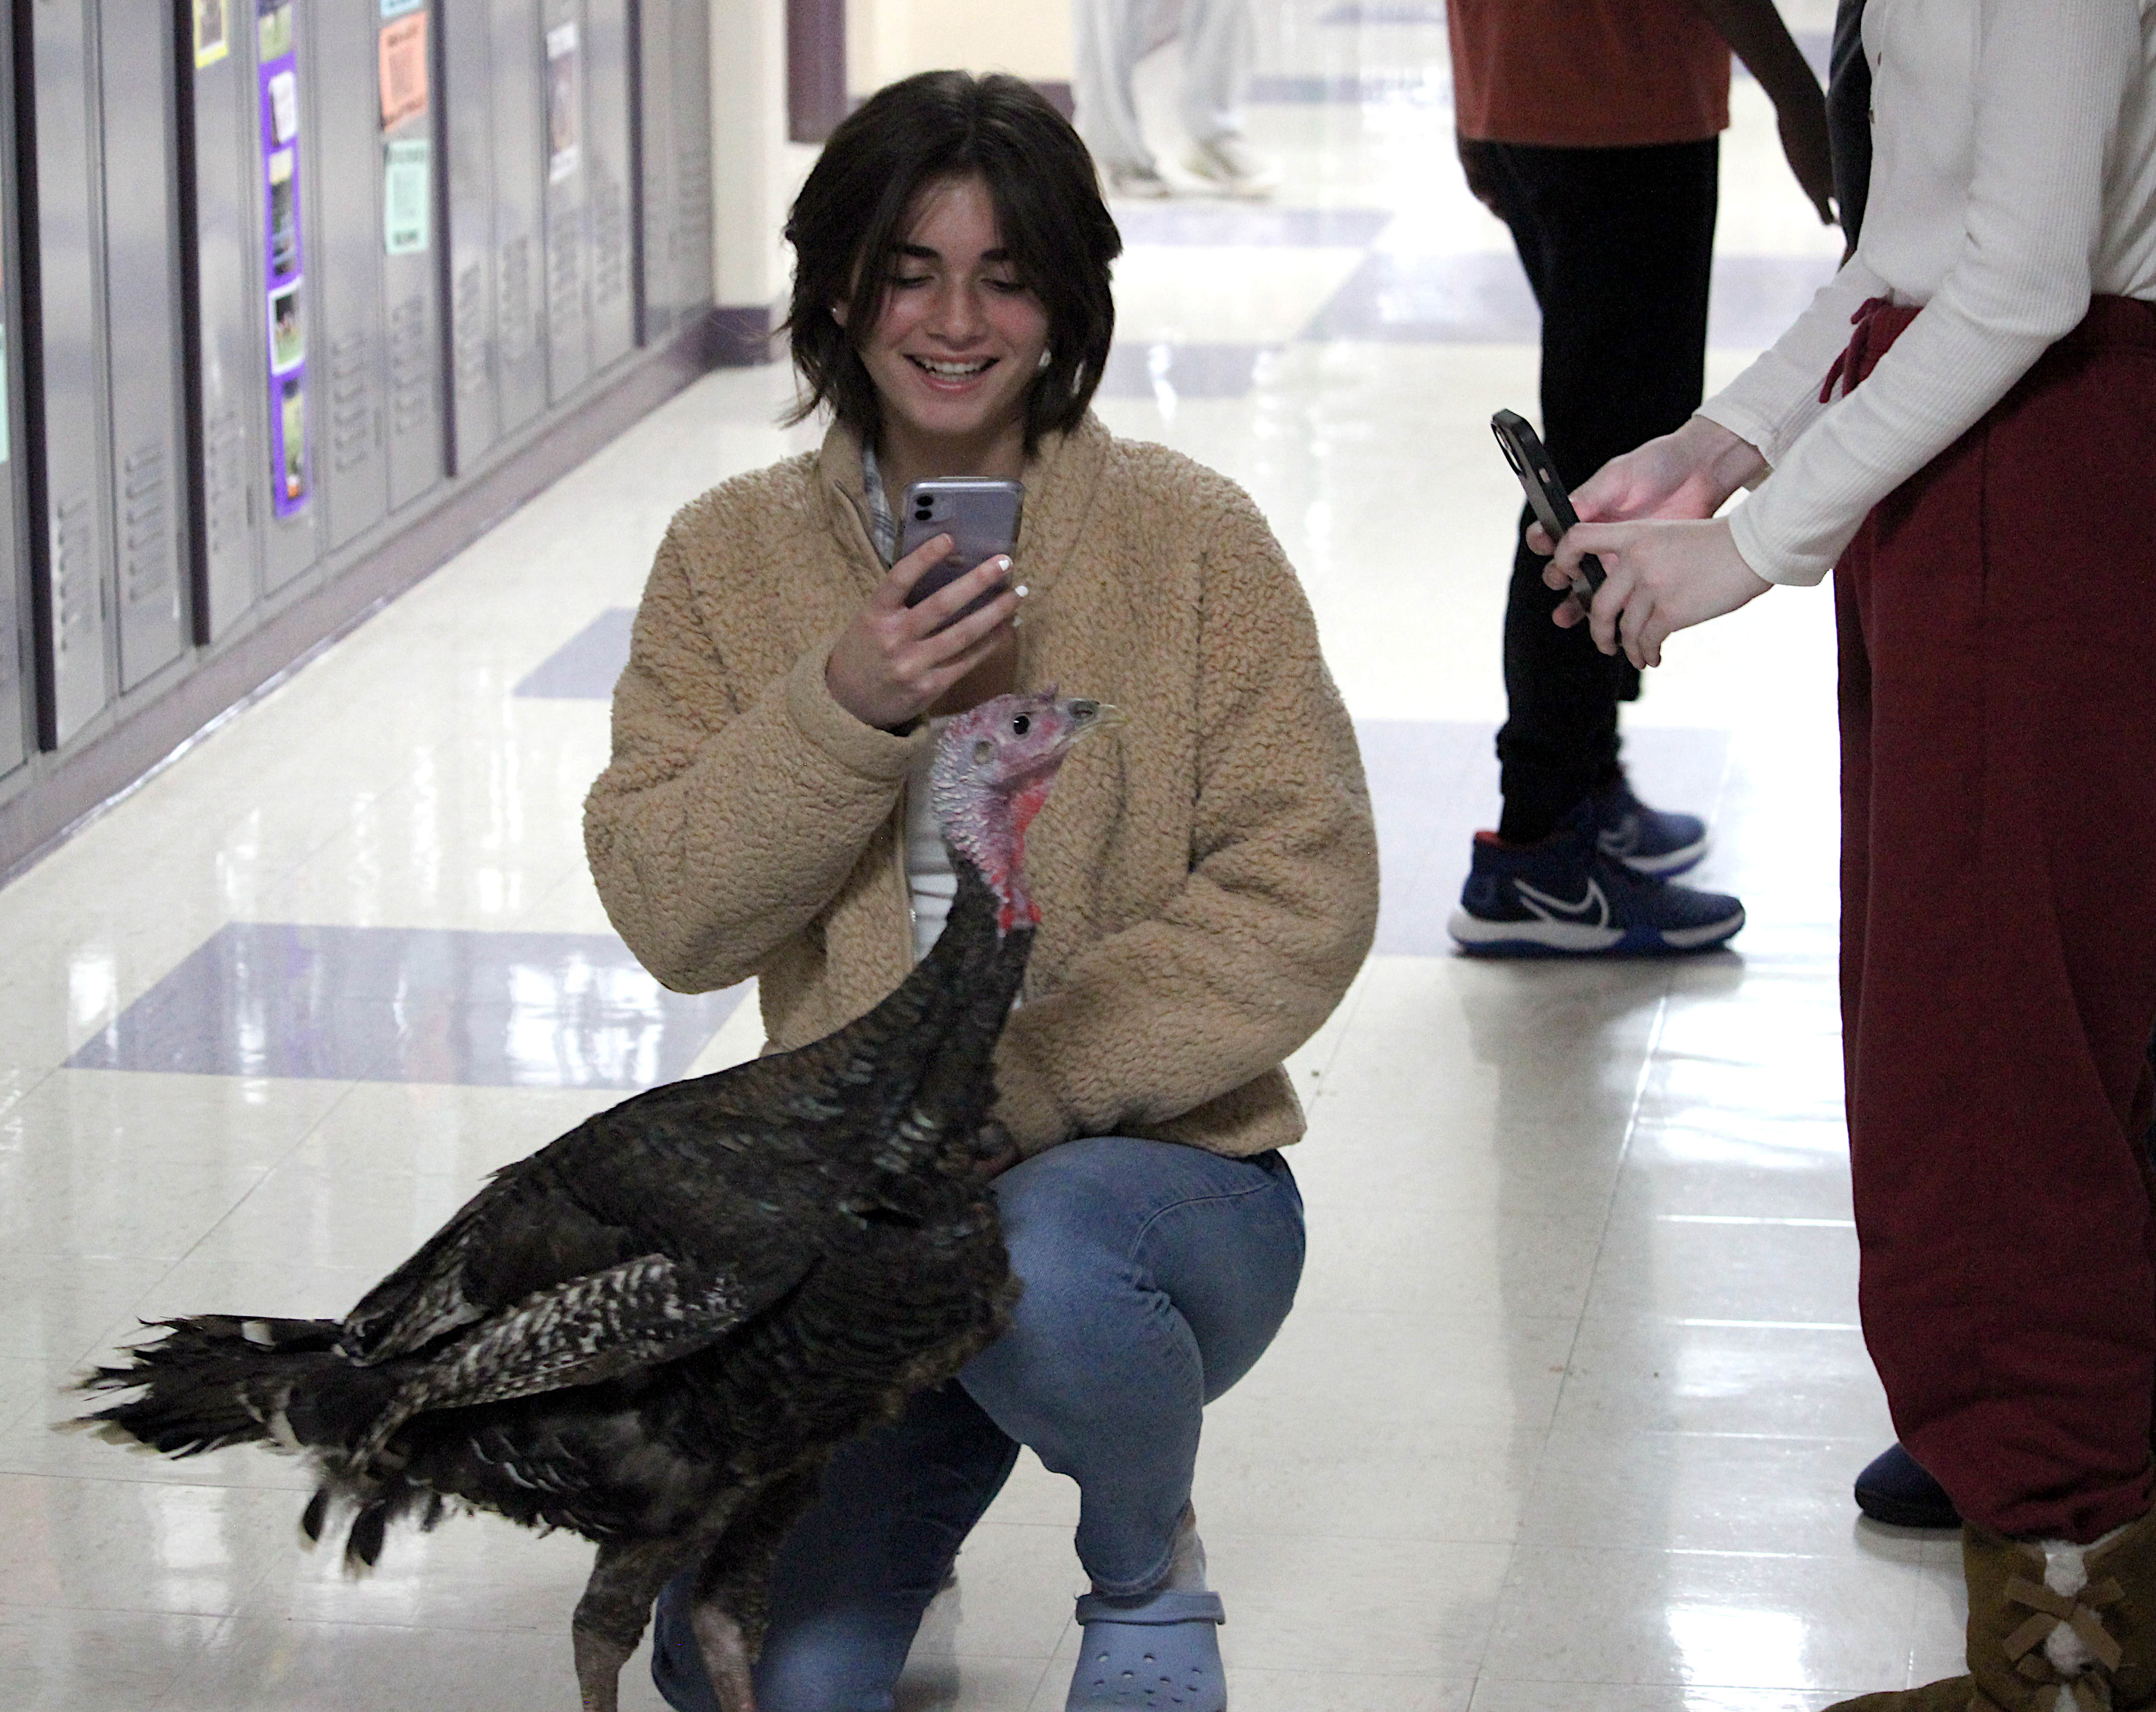 Students at the high school take pictures of a turkey